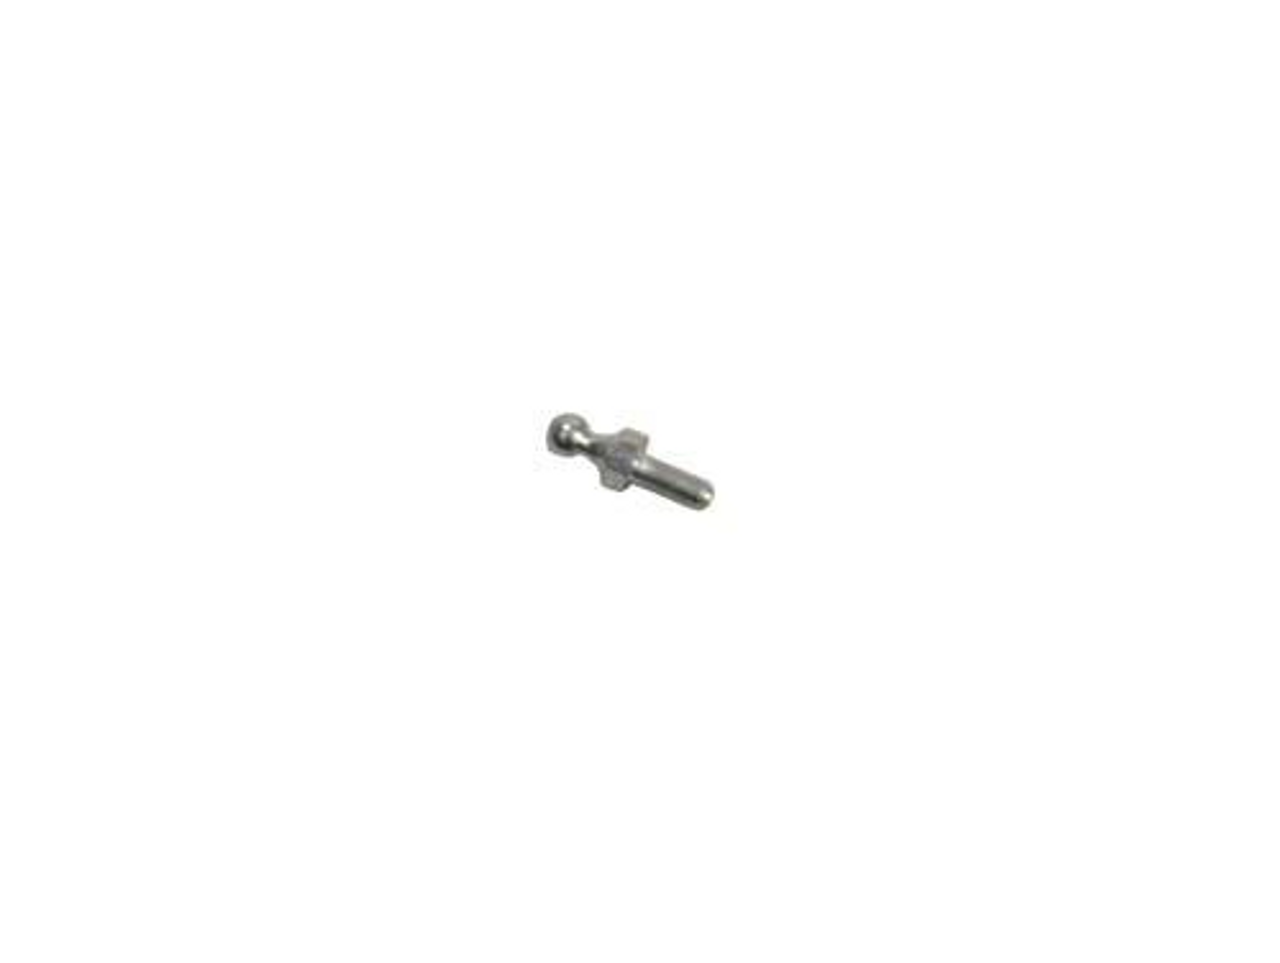 Ball stud (Forward & Reverse shifter cable) E-Z-GO G RXV/TXT, 50464, 72732-G01